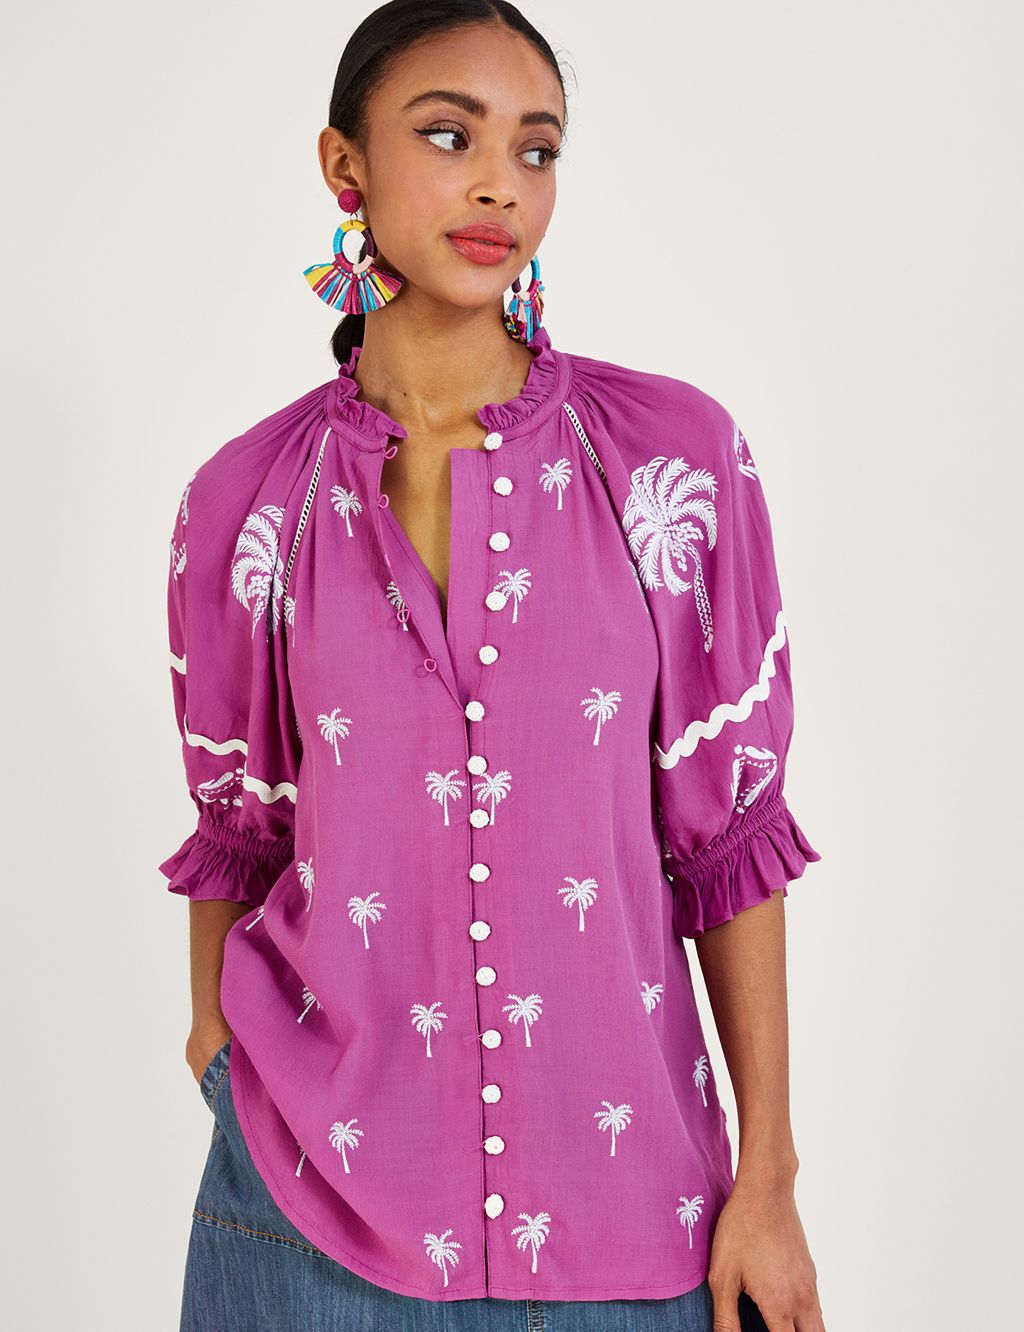 Embroidered High Neck Frill Detail Blouse image 1